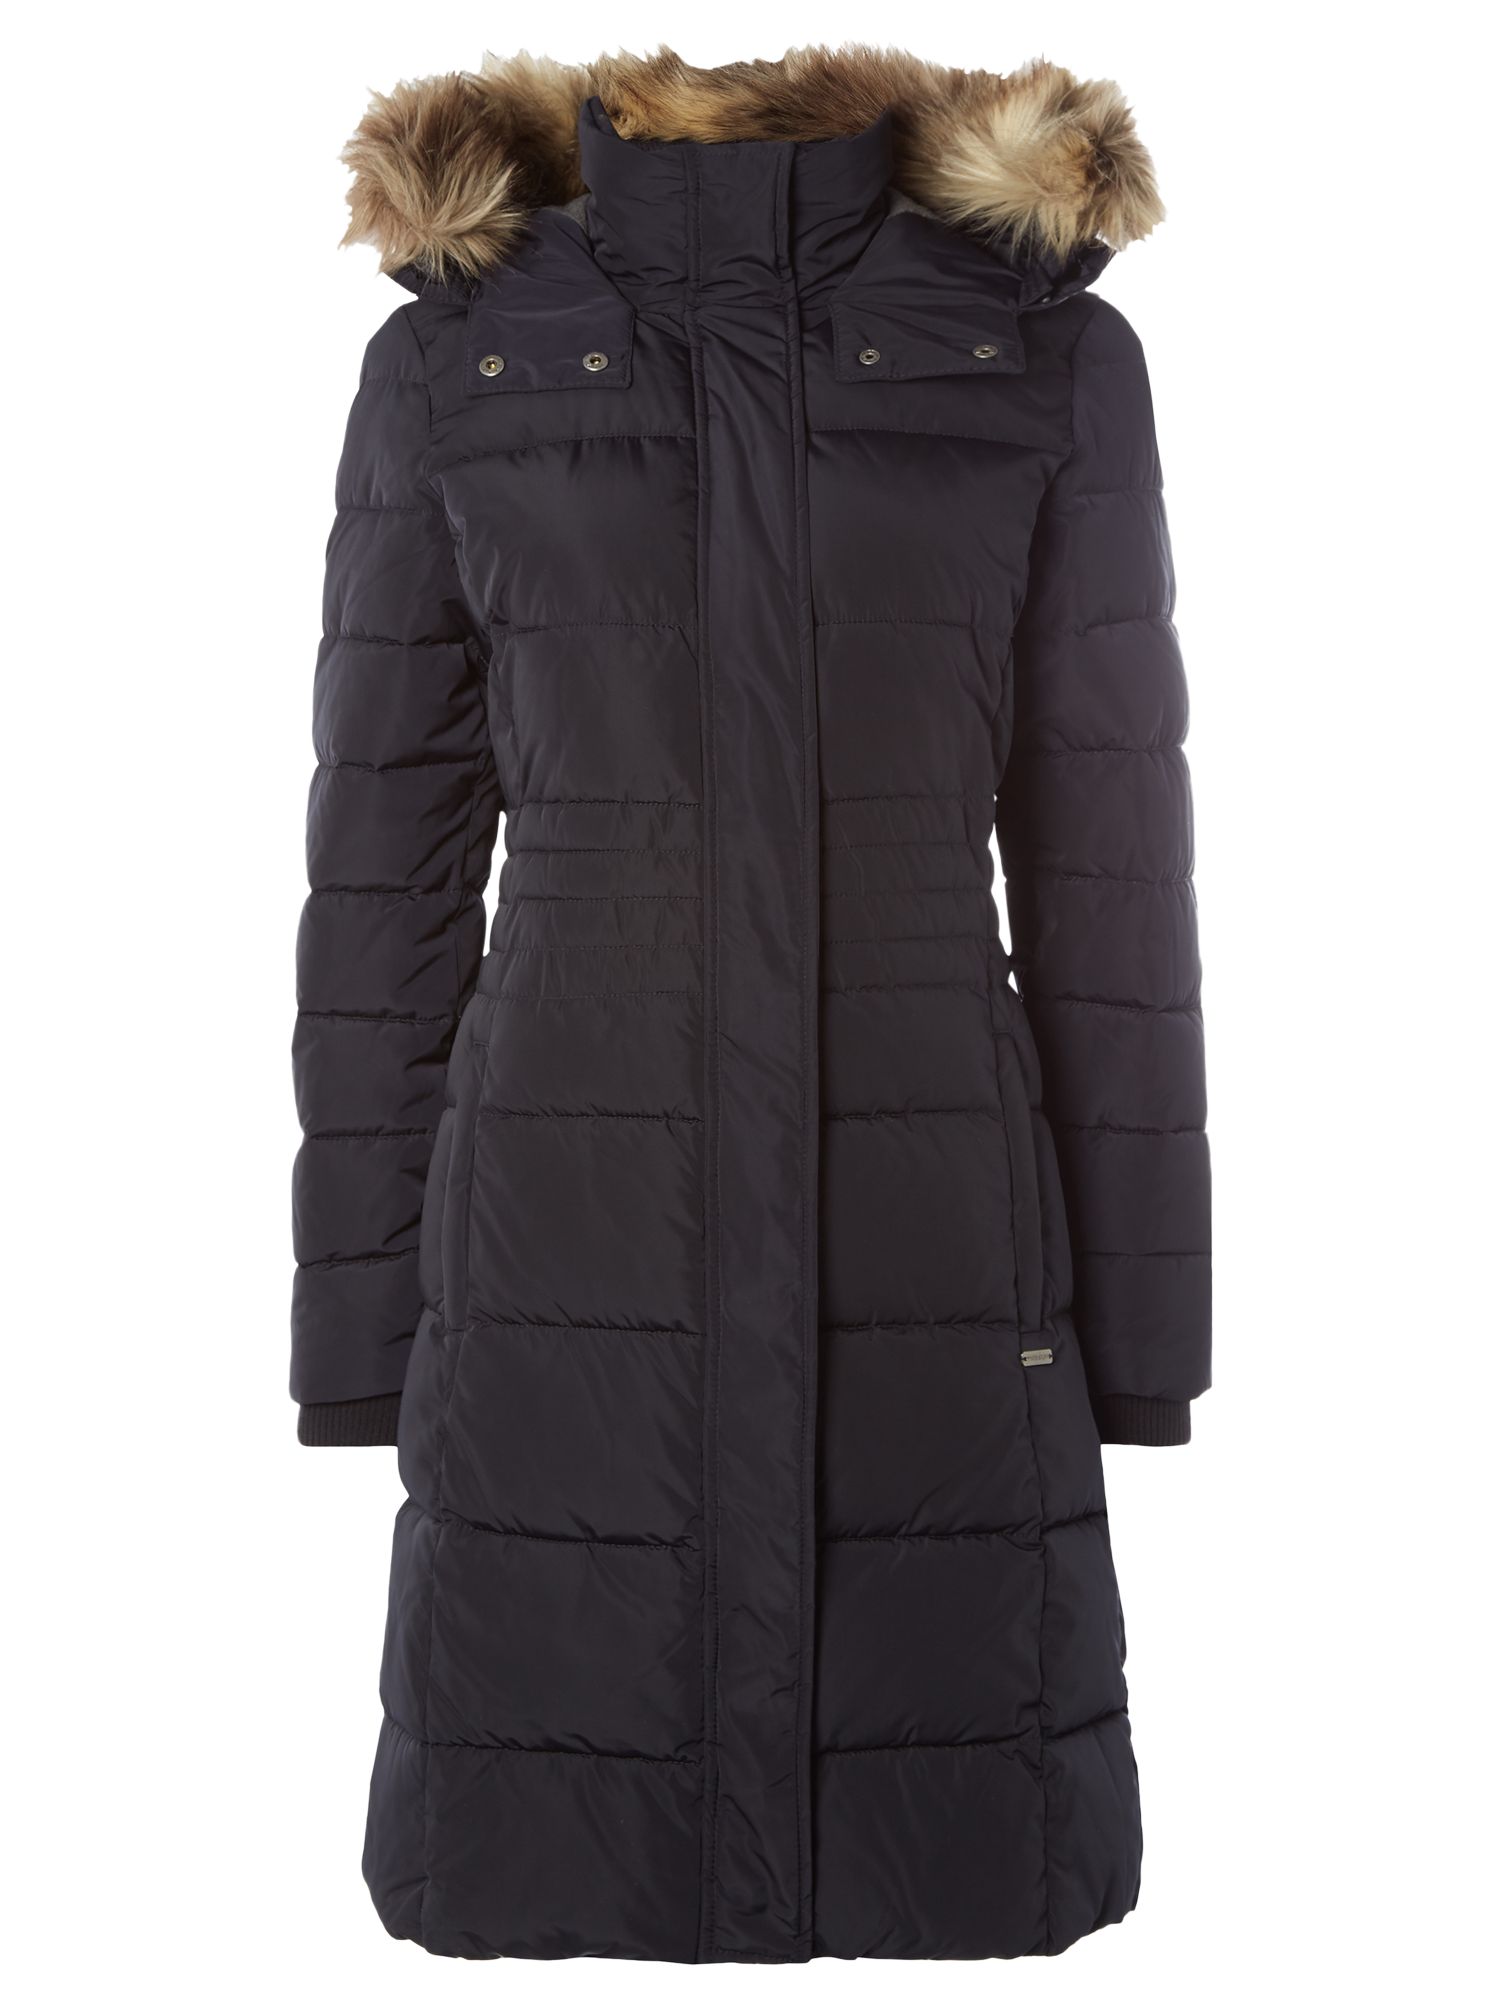 White Stuff Thirlmere Long Quilted Coat, Navy at John Lewis & Partners